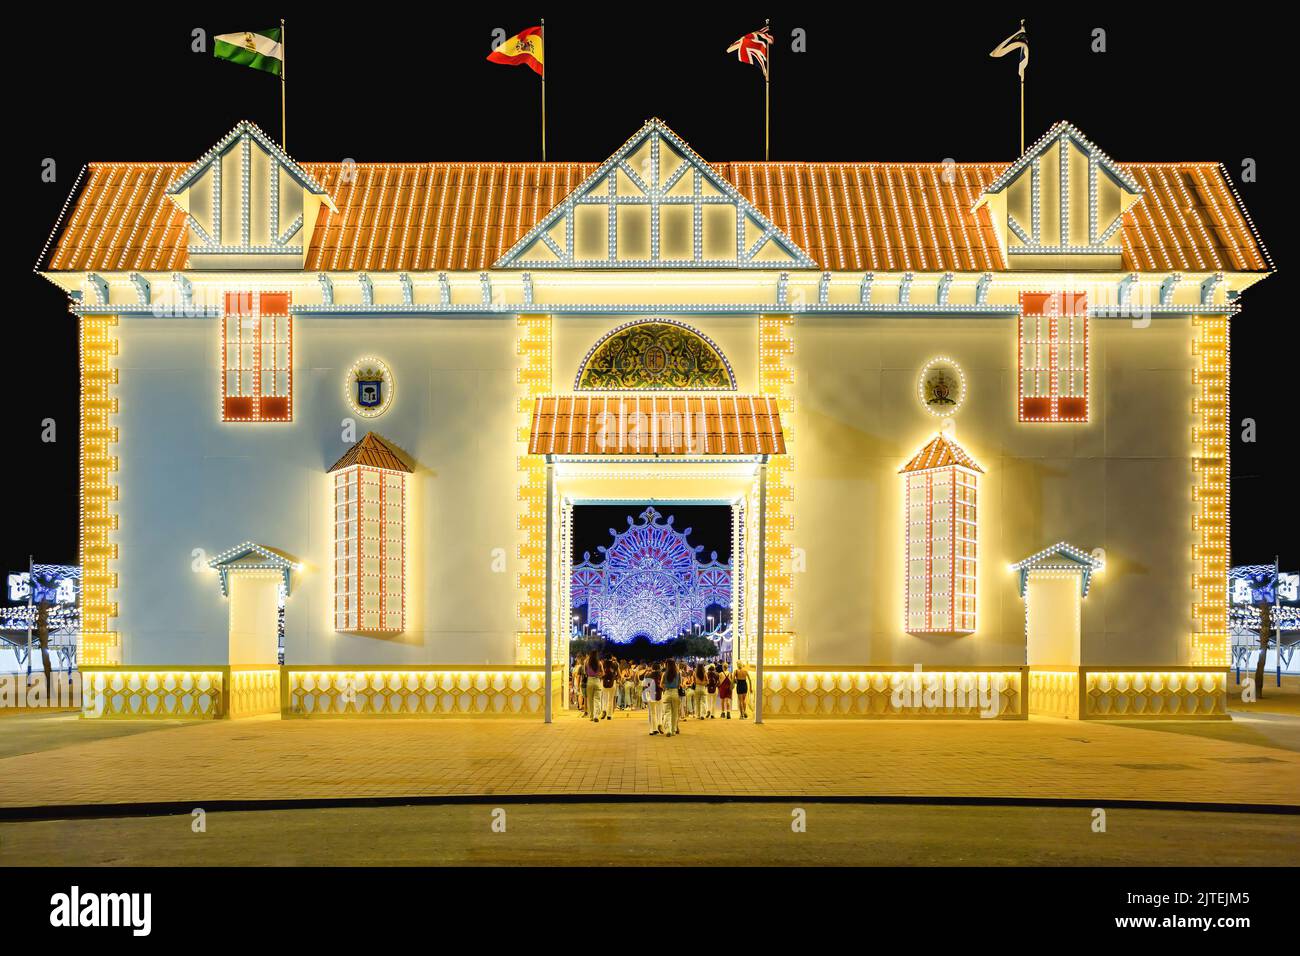 Illuminated doorway for the 2022 Colombine festivities, which recreates one of the 274 homes in the Reina Victoria neighborhood, also known as Barrio Stock Photo